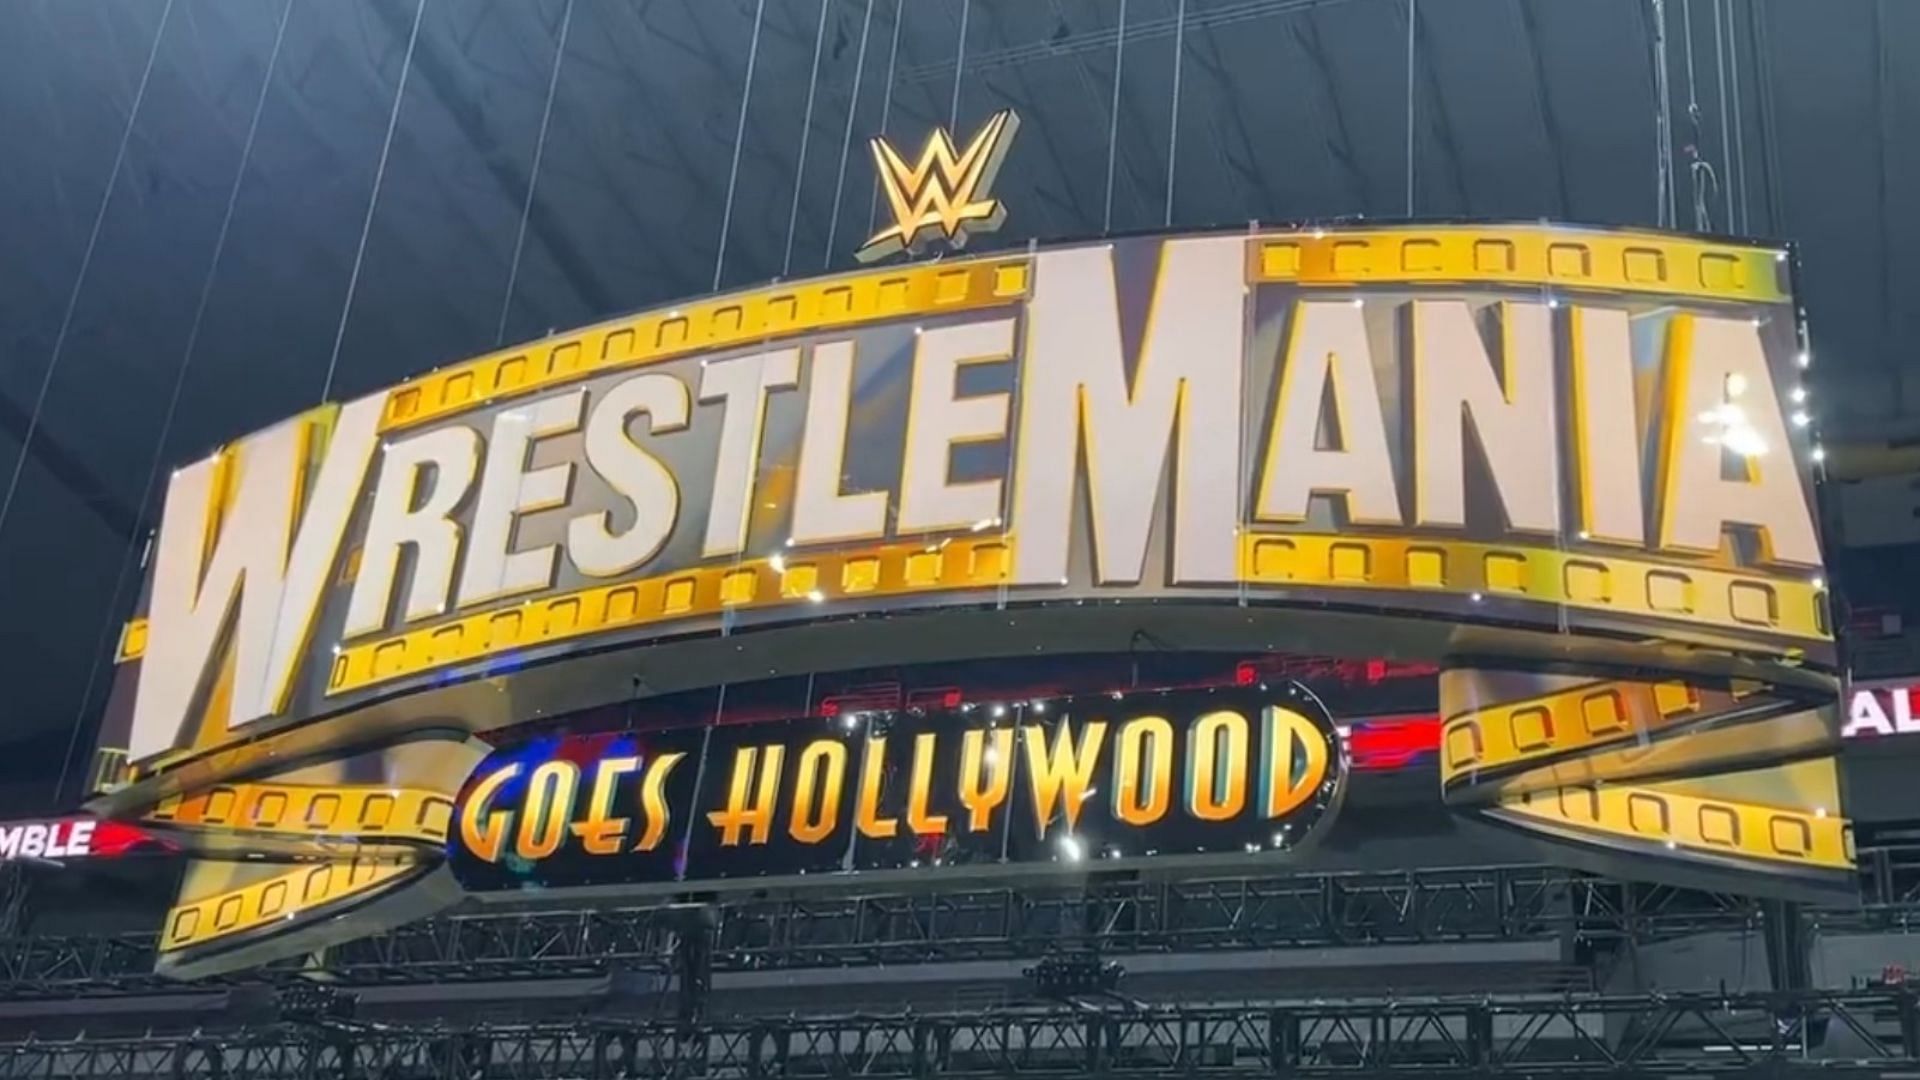 WWE WrestleMania 39 will take place on April 1 &amp; 2